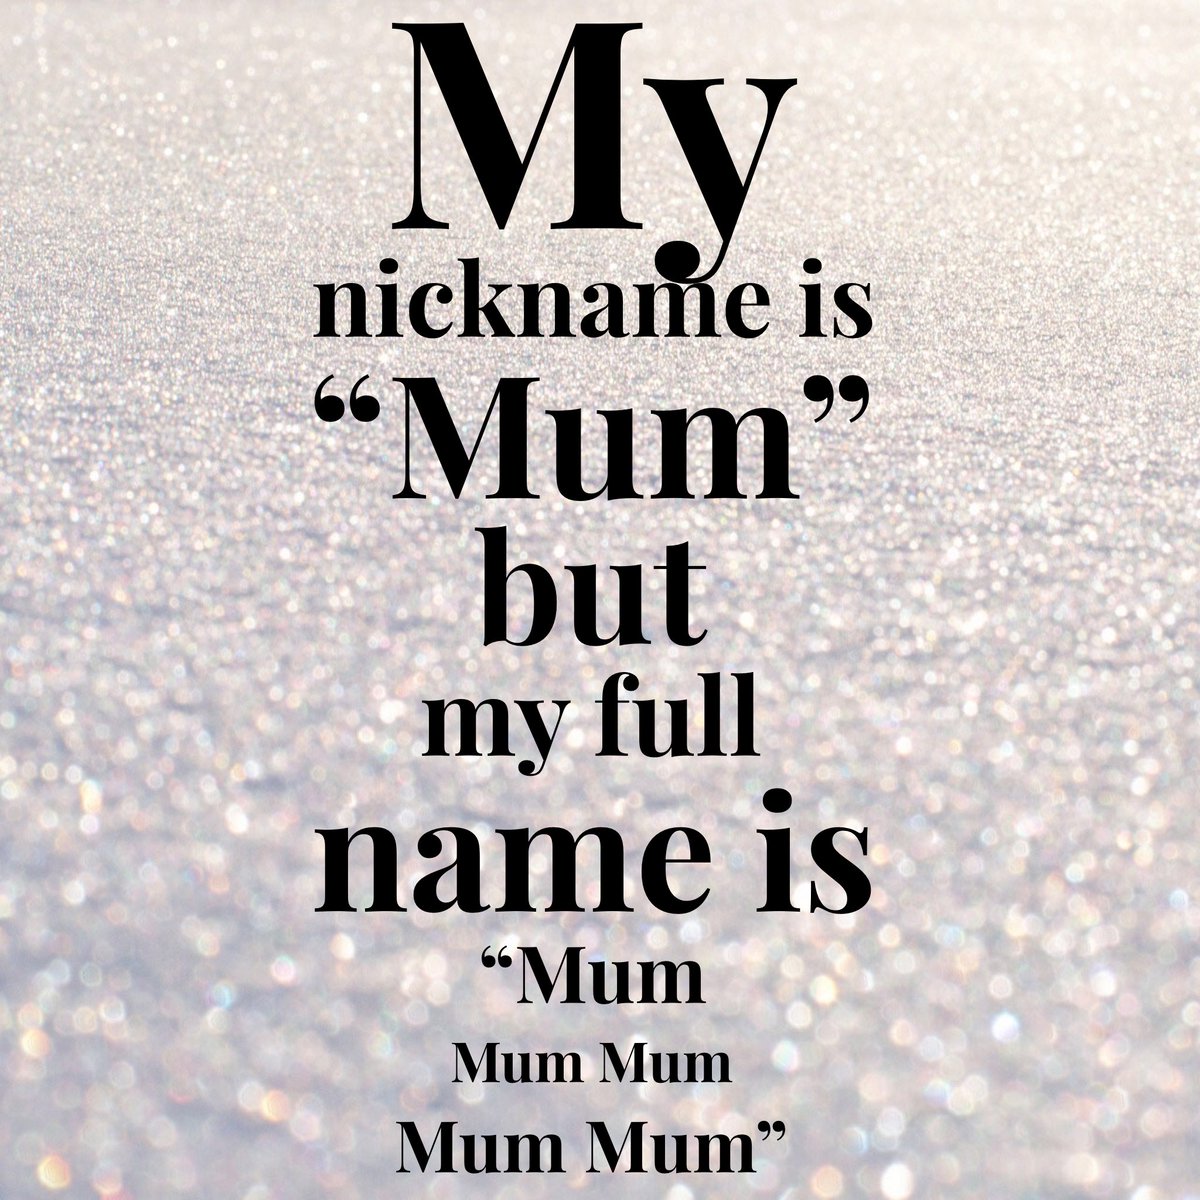 Mums Know Best on Twitter: 